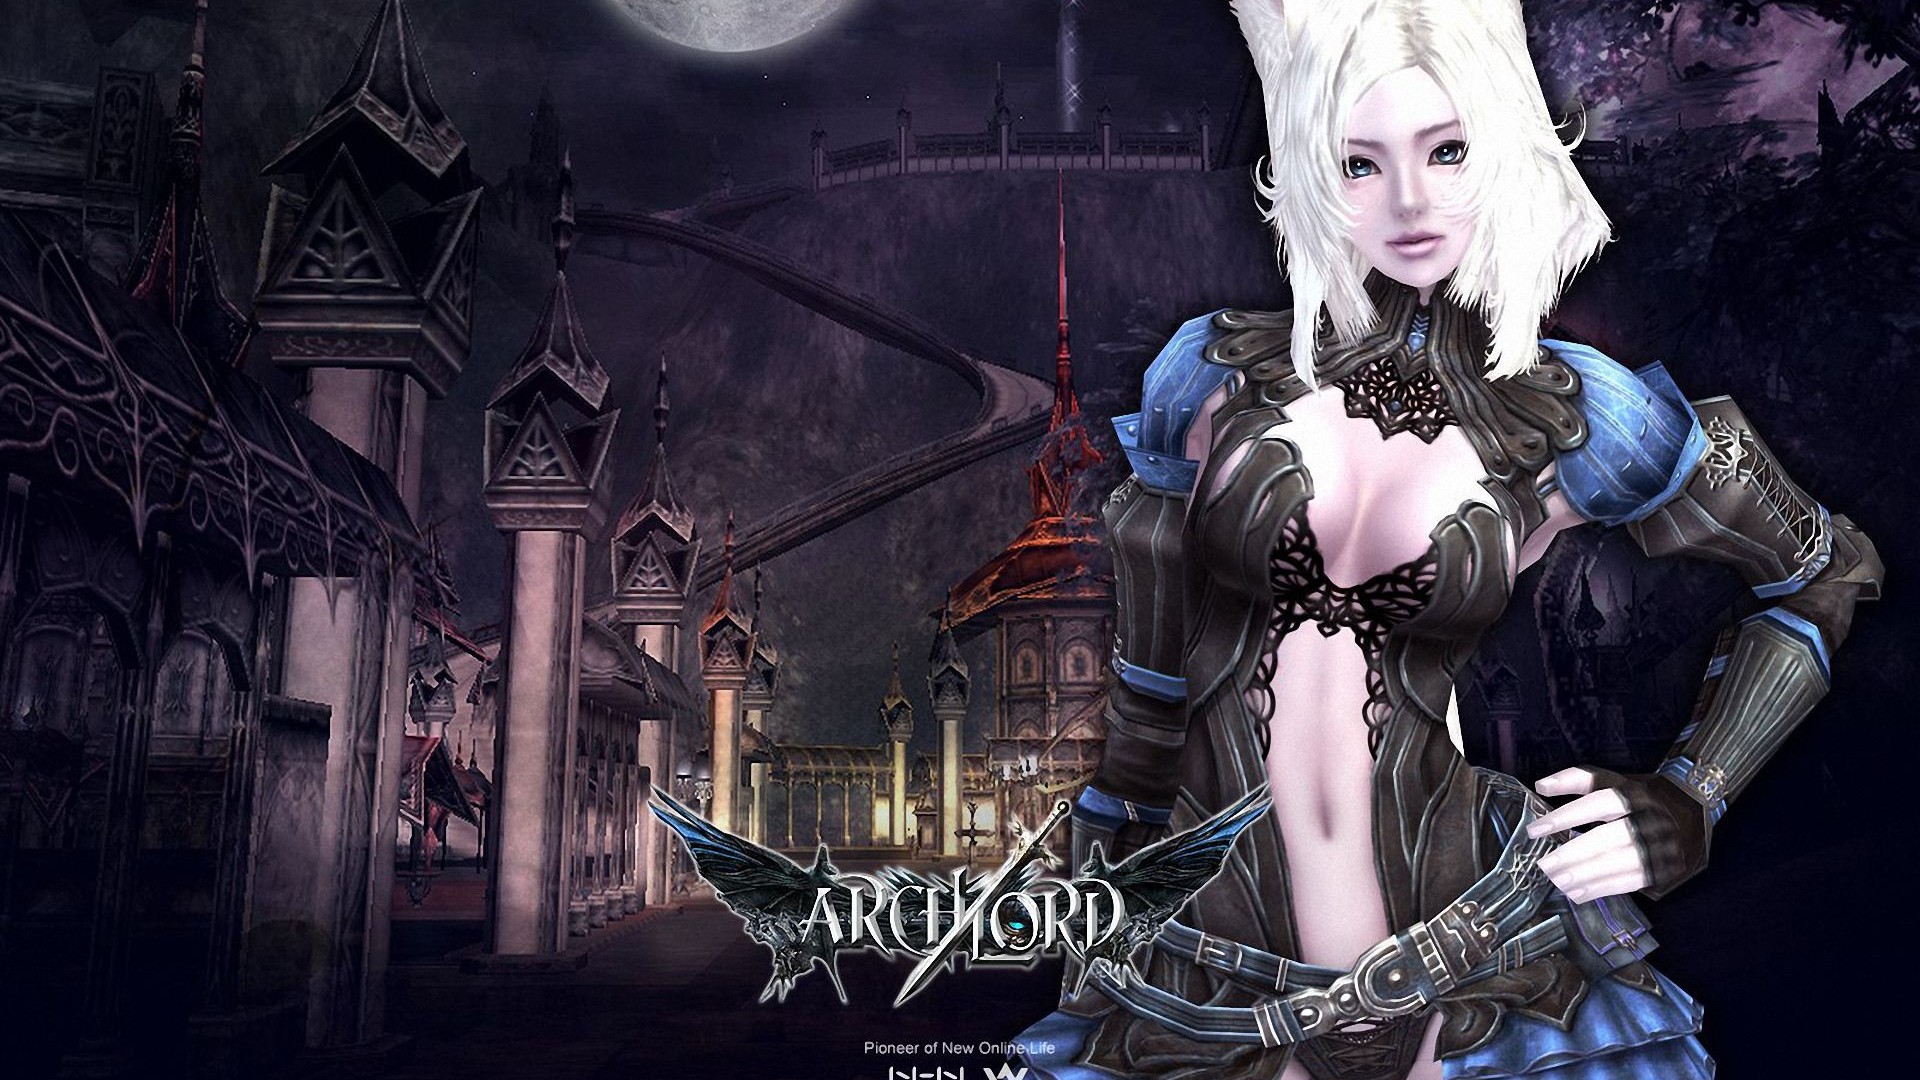 Free Download Archlord Hd Wallpaper 7 1920 X 1080 Stmednet 1920x1080 For Your Desktop Mobile